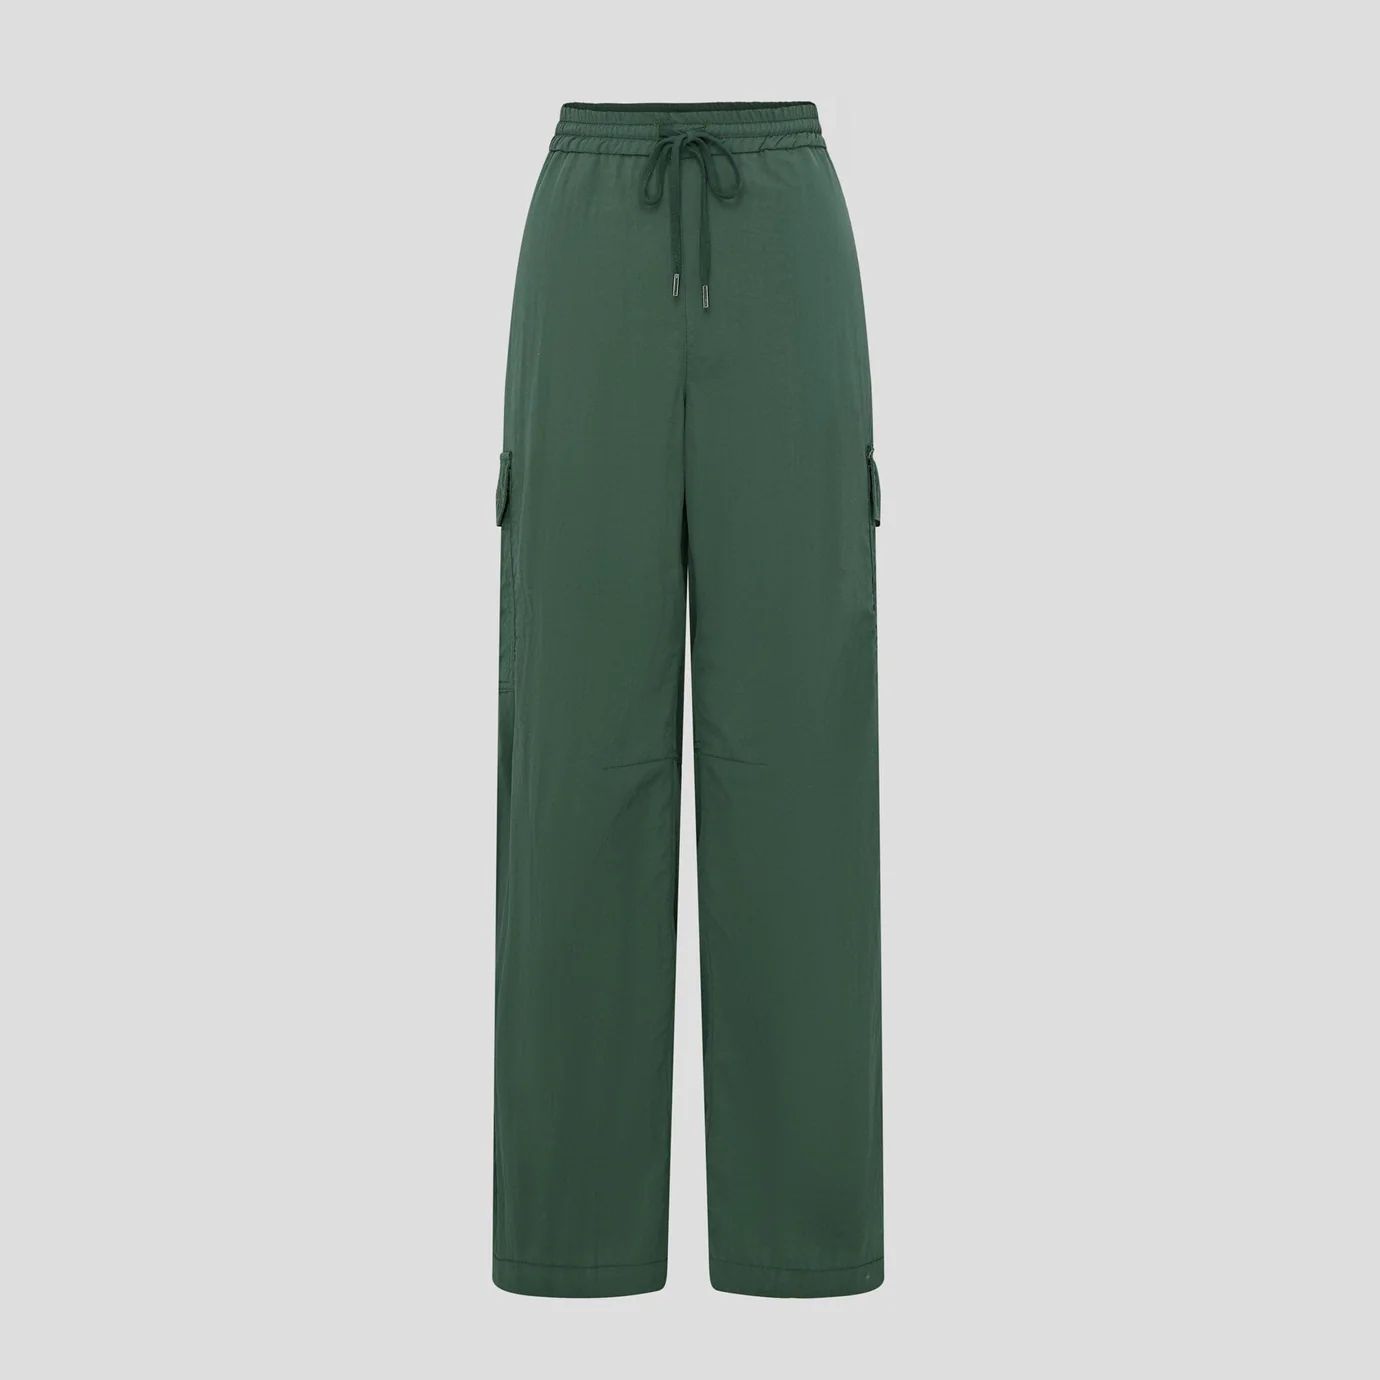 PARACHUTE TROUSERS - FOREST GREEN | WAT The Brand